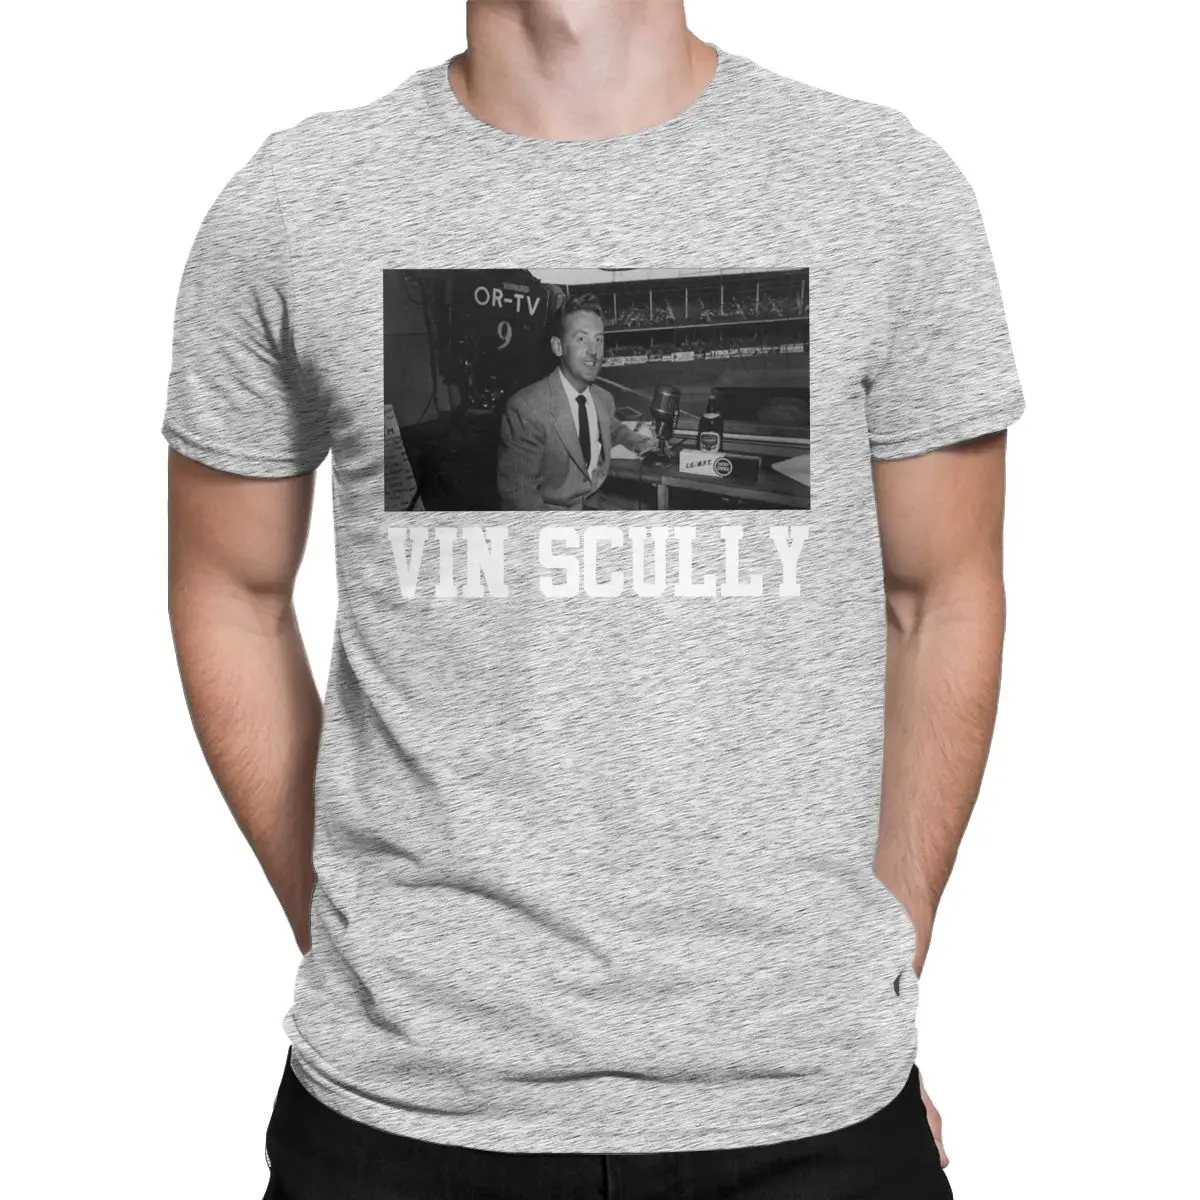 The Call - Vin Scully  Tees, Vin scully, Grey tee